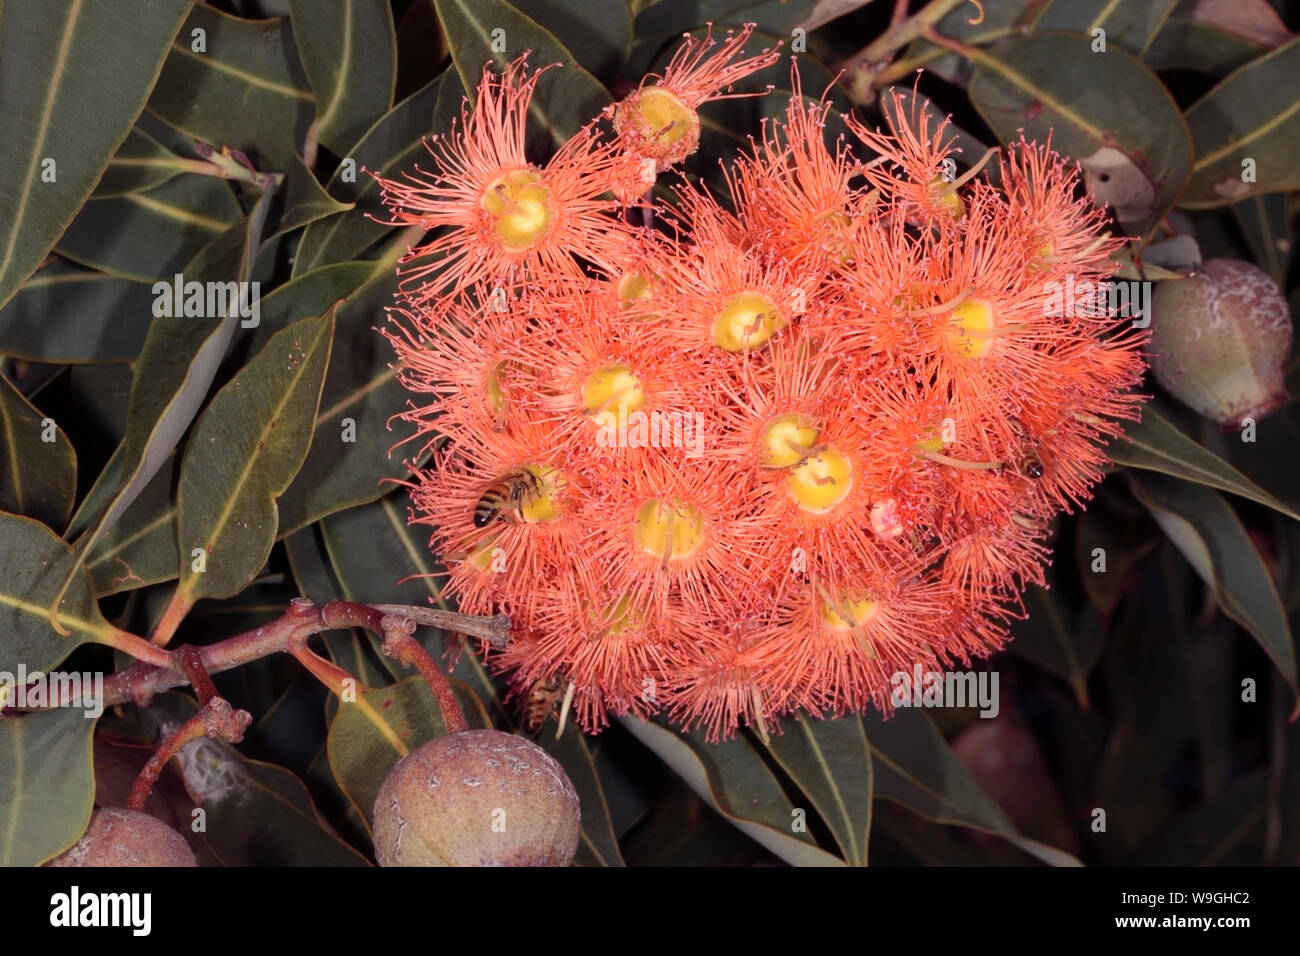 Close-up of flowers of Red-flowering gum tree- Eucalyptus ficifolia- Family Stock Photo